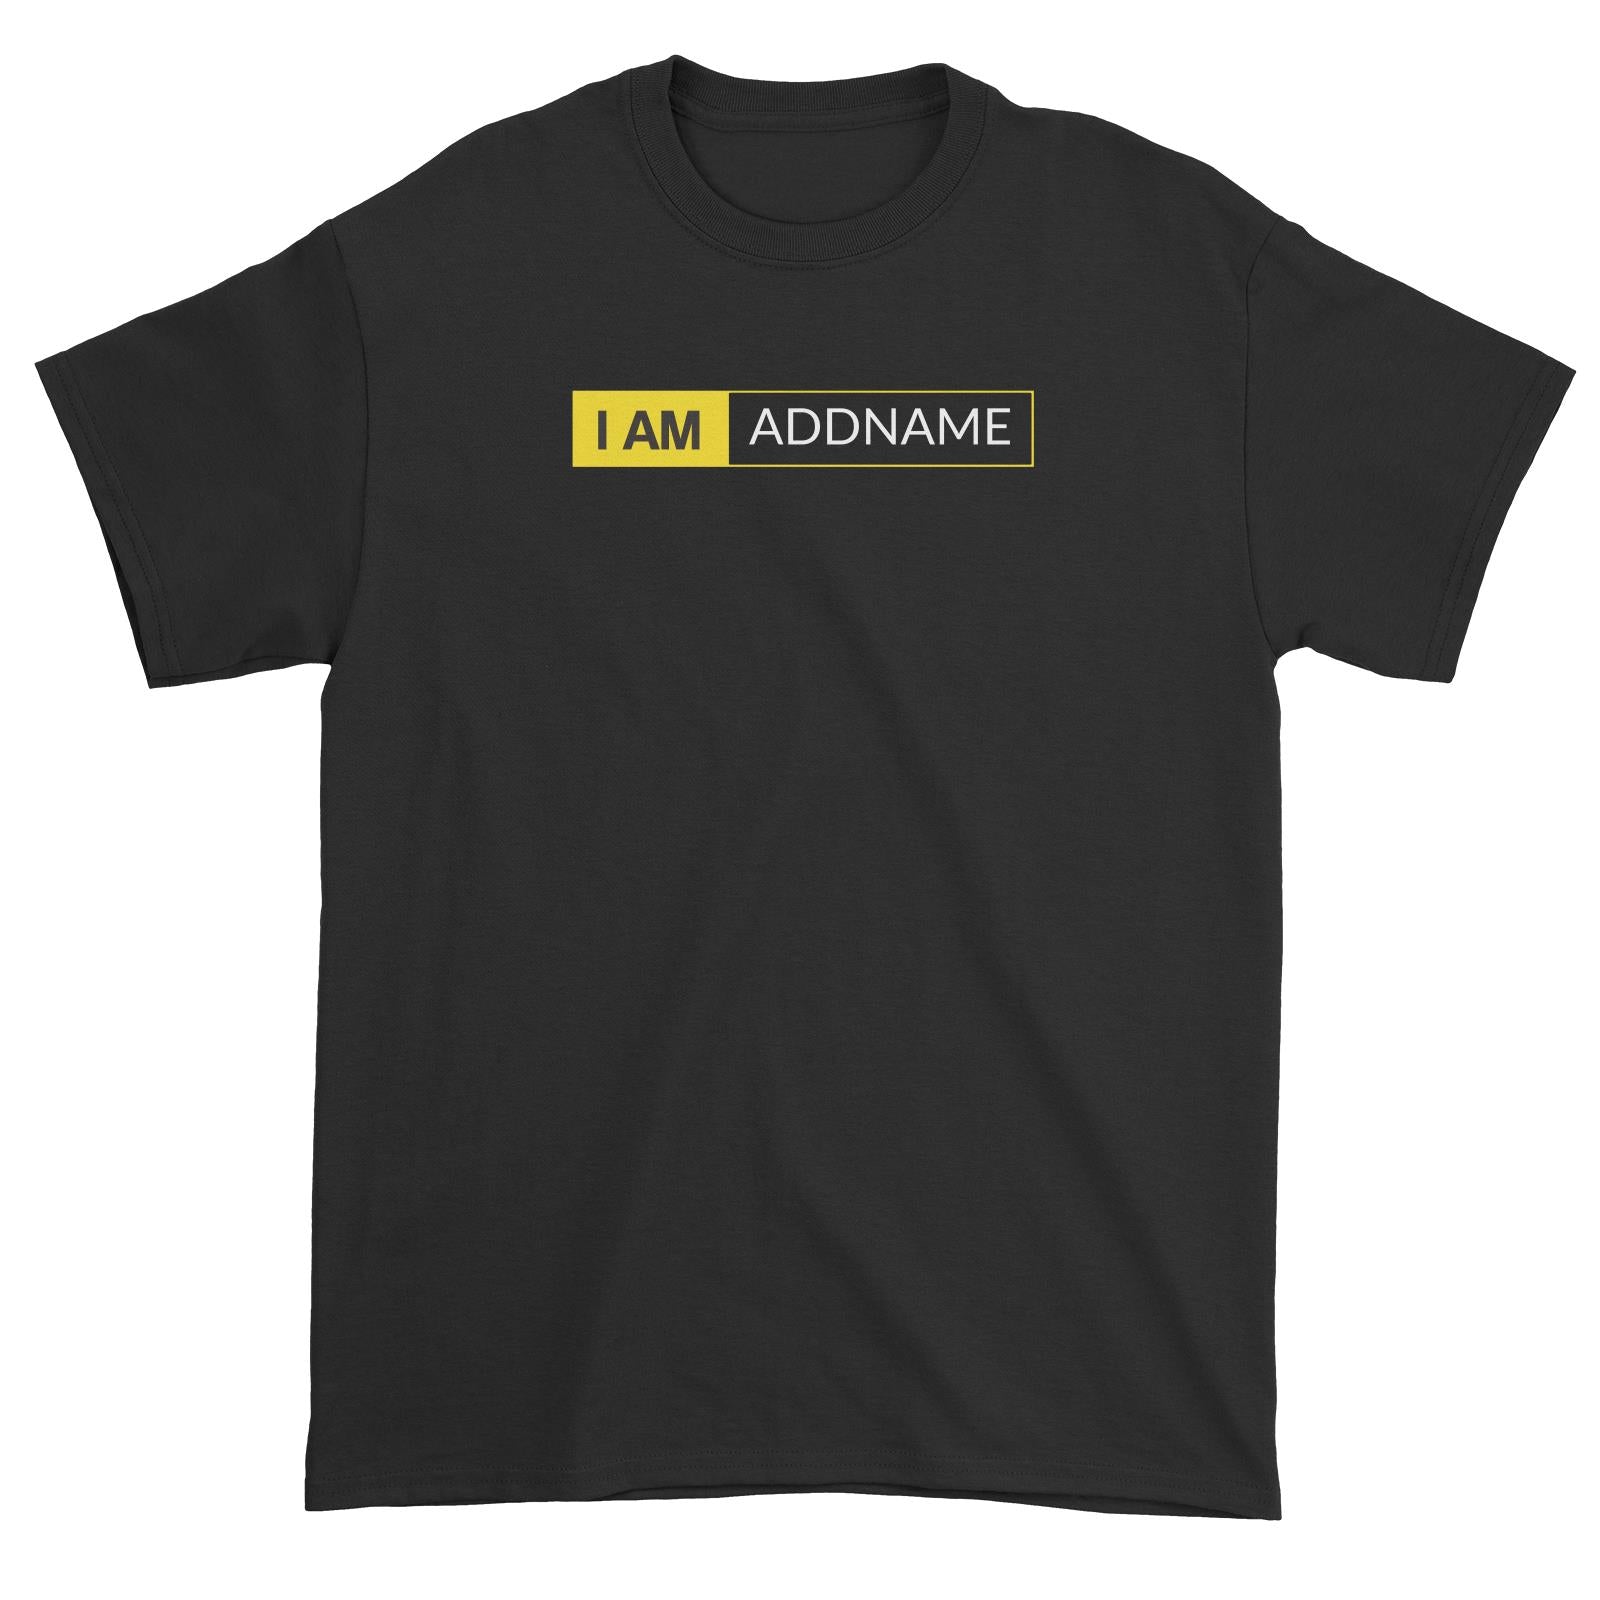 I AM Addname in Yellow Box Unisex T-Shirt Basic Nikon Matching Family Personalizable Designs